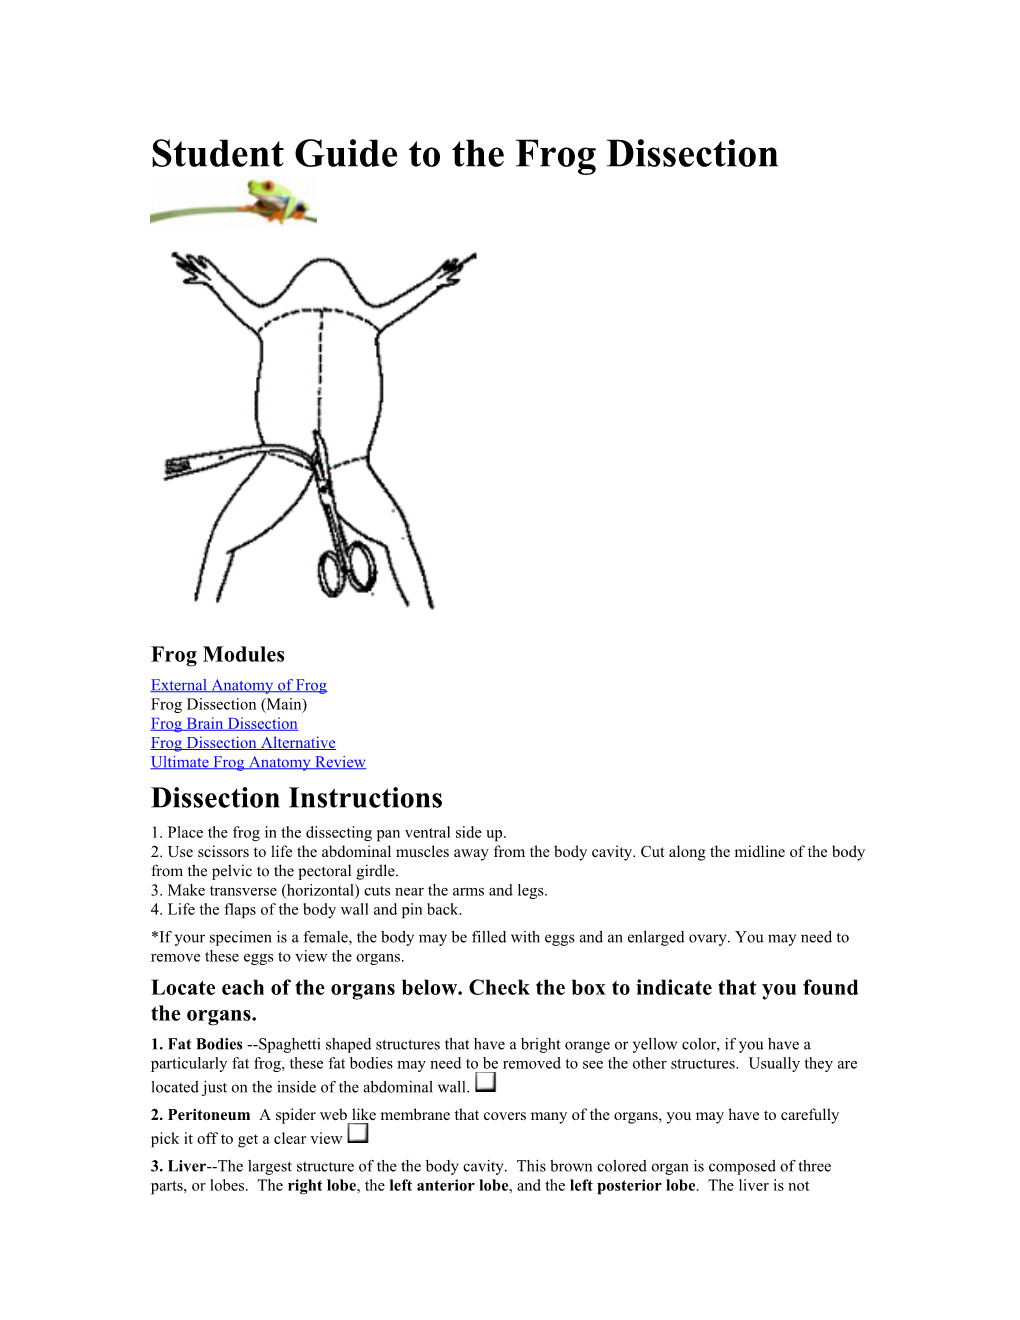 Dissection Instructions